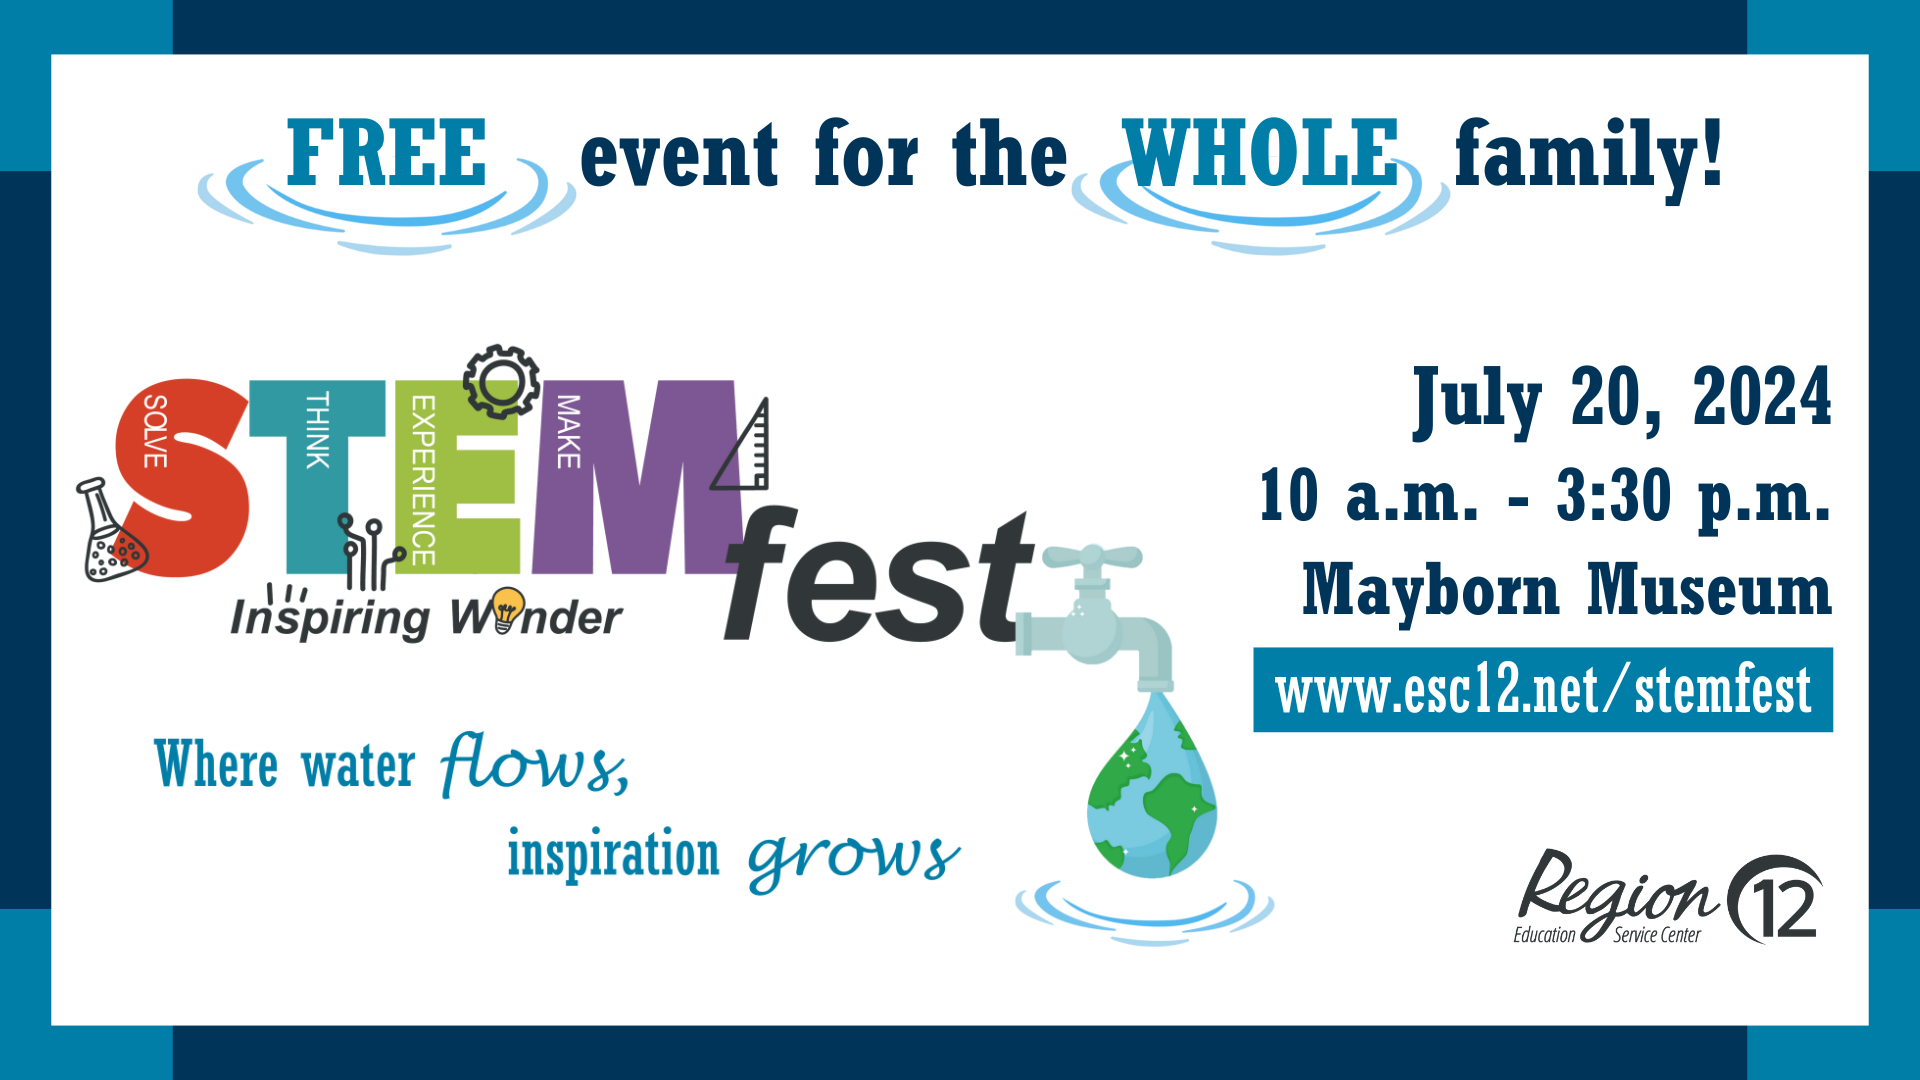 STEMfest 2024 Graphic. Free event for the whole family! STEMfest where water flows inspiration grows. July 20, 10:00 a.m. to 3:30 p.m. at the Mayborn Museum